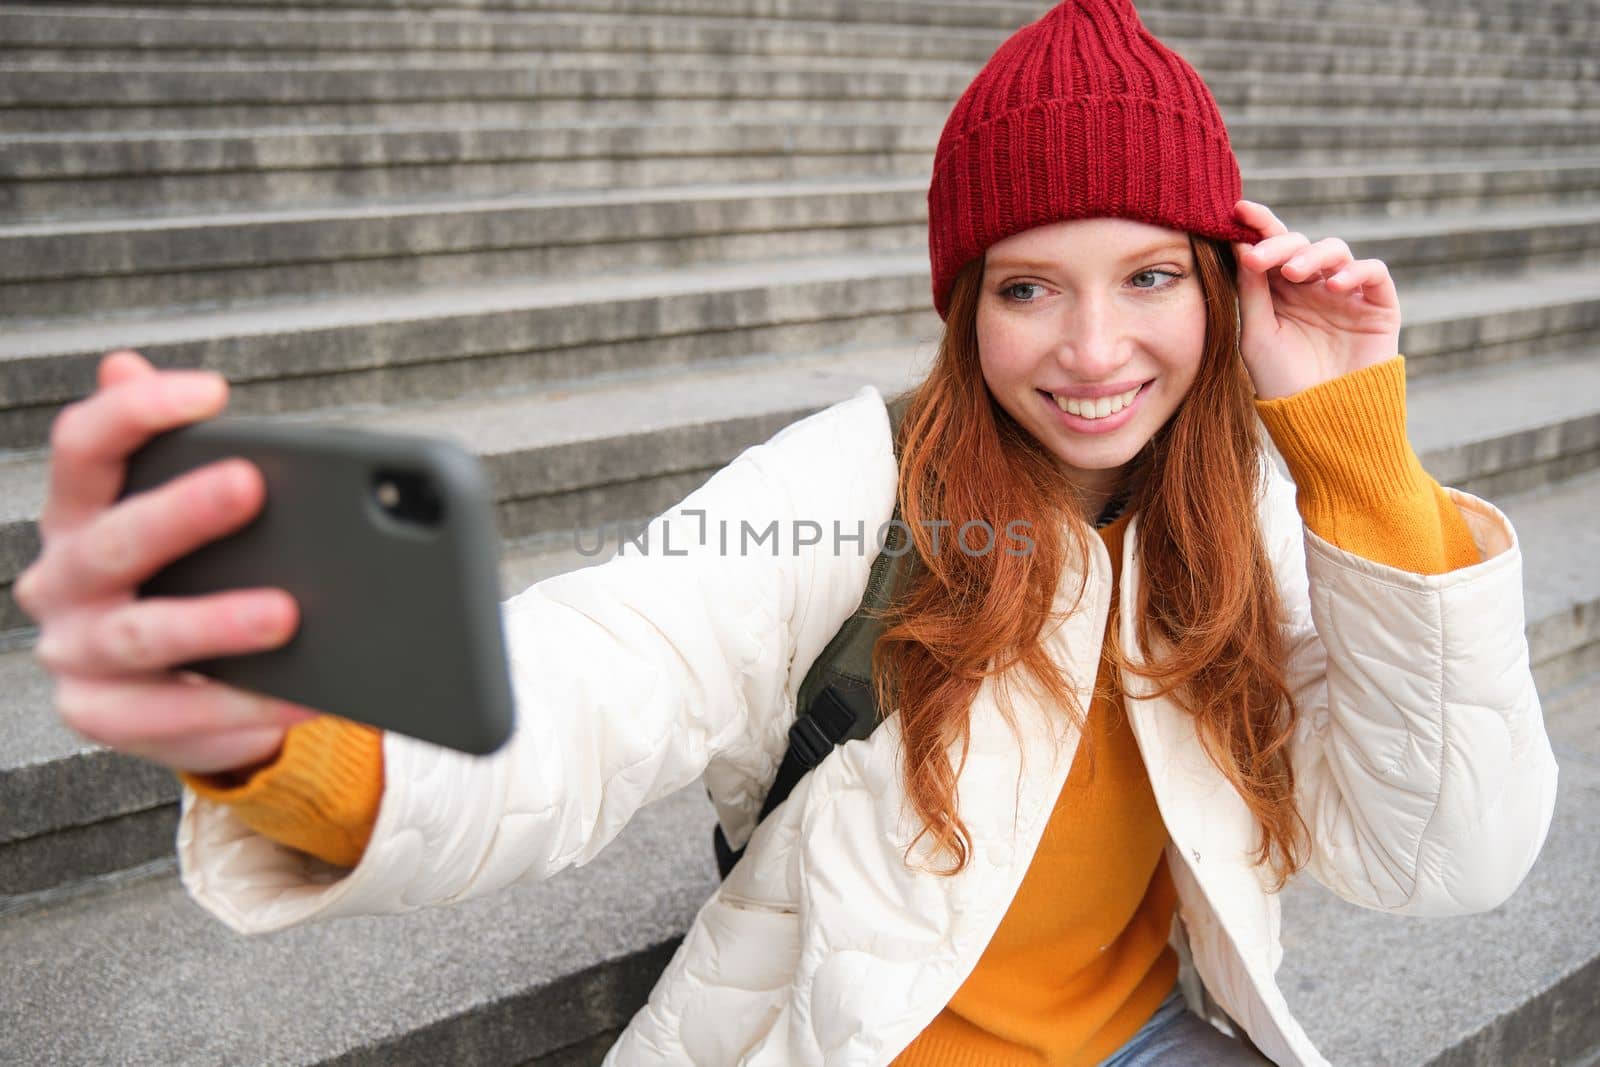 Stylish young girl in red hat, takes photos on smartphone camera, makes selfie as she sits on stairs near museum, posing for photo with app filter.